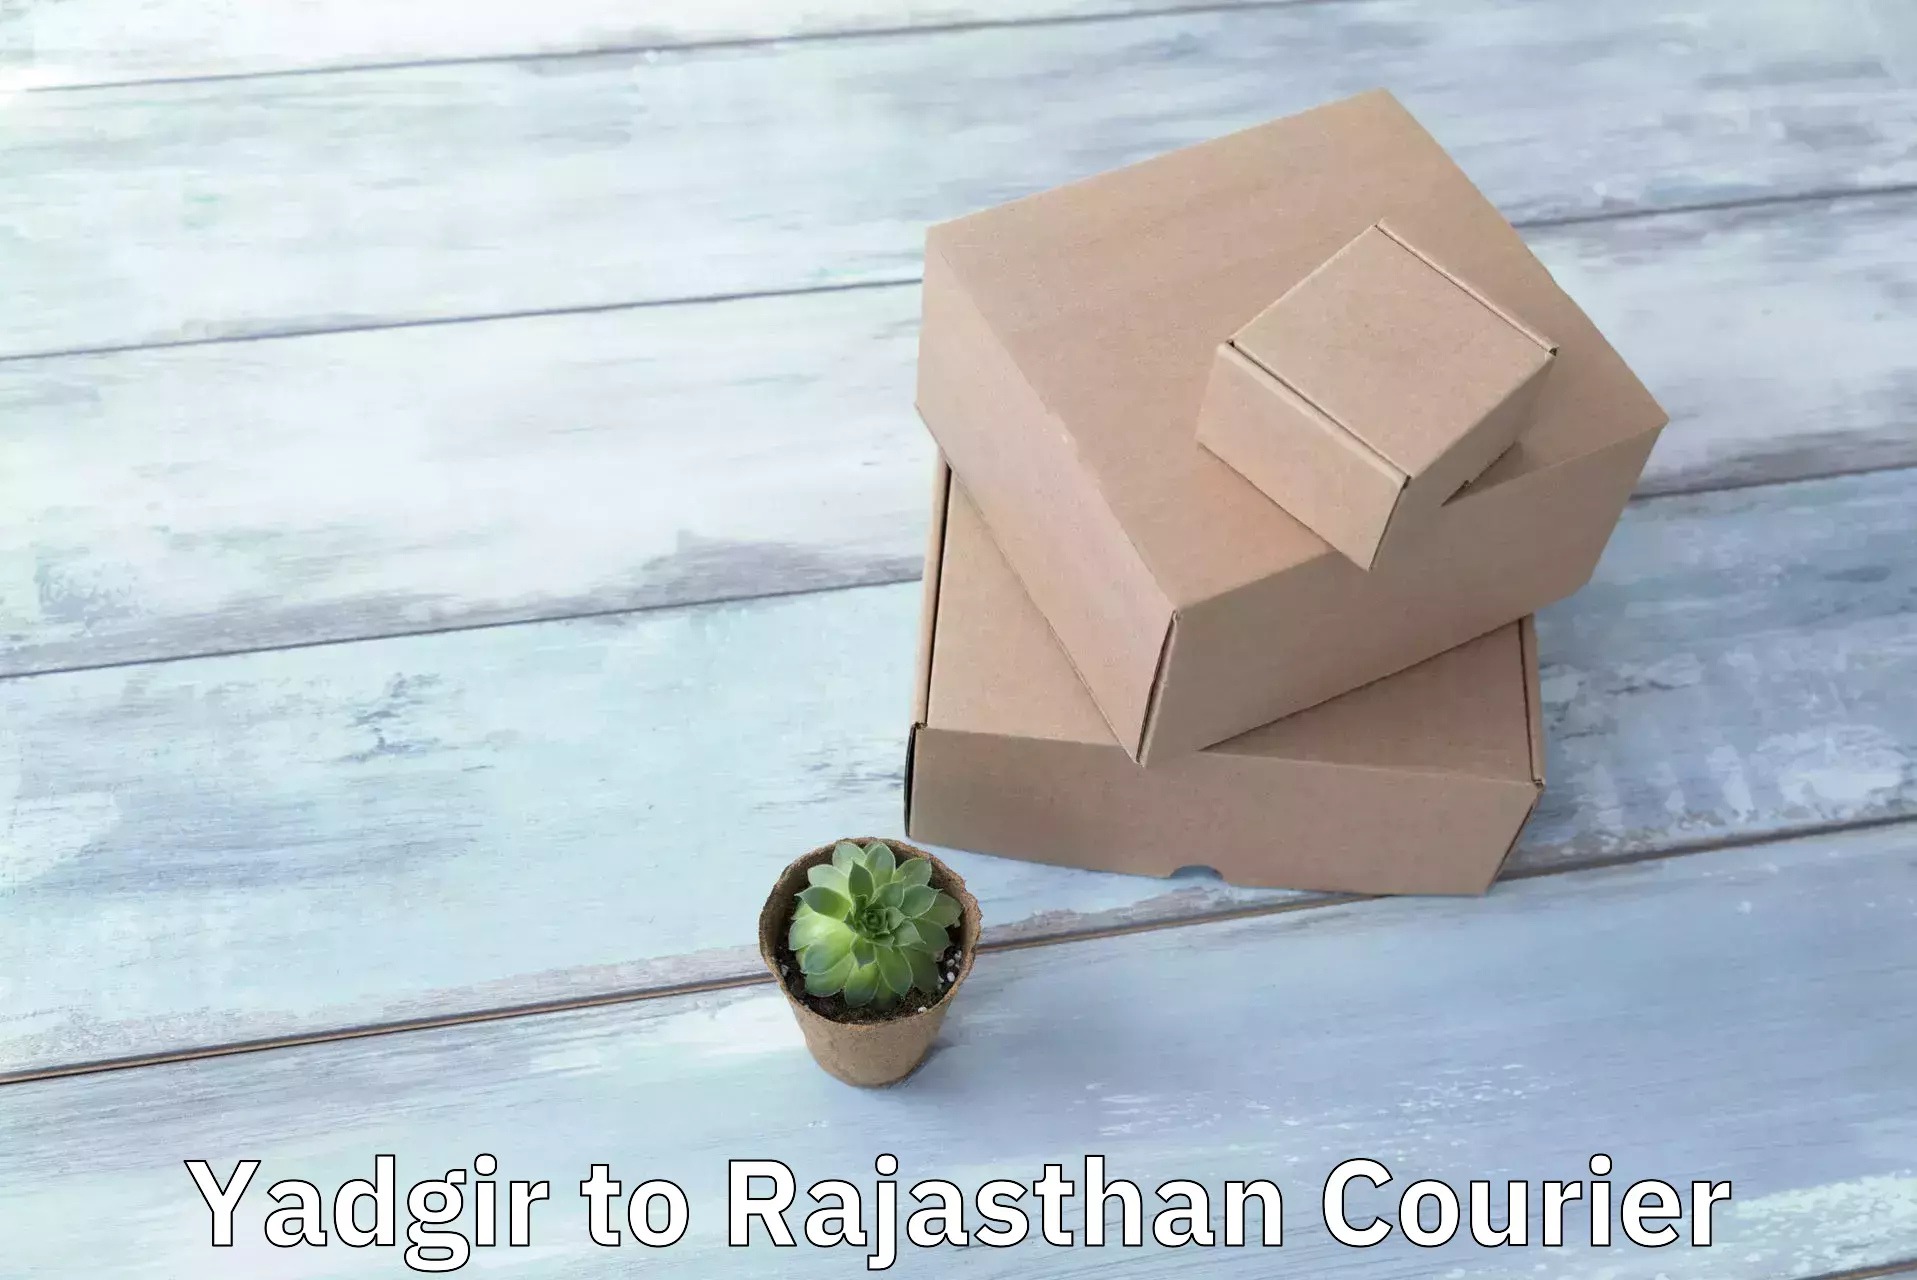 Innovative shipping solutions Yadgir to Yeswanthapur